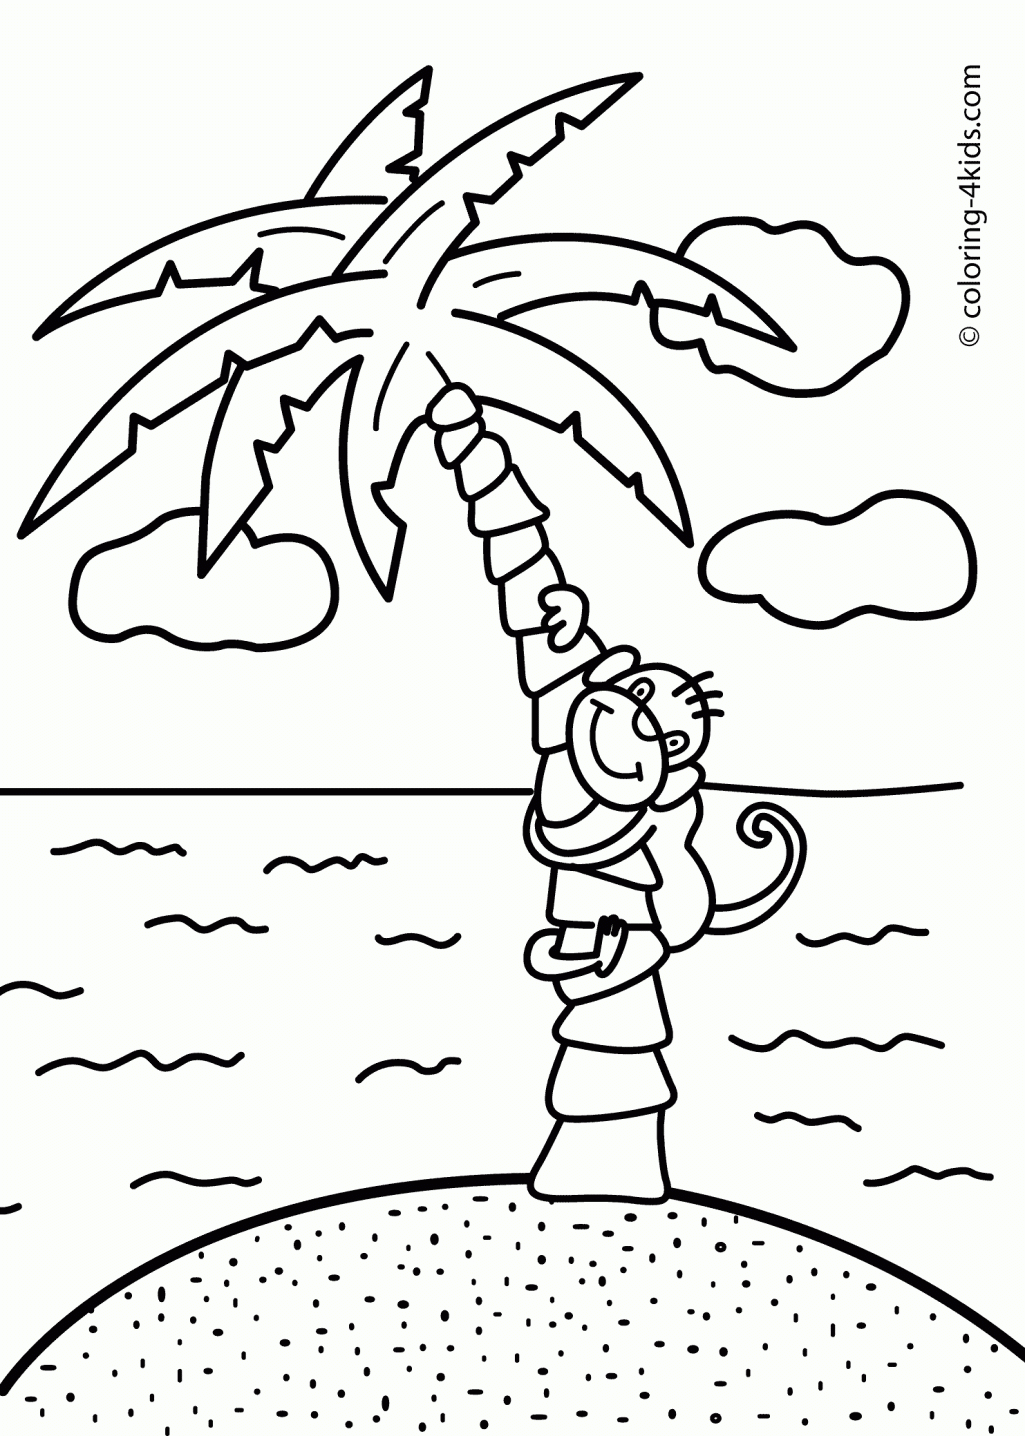 Category Coloring Pages Of Nature Scenes Nature Coloring Pages ...